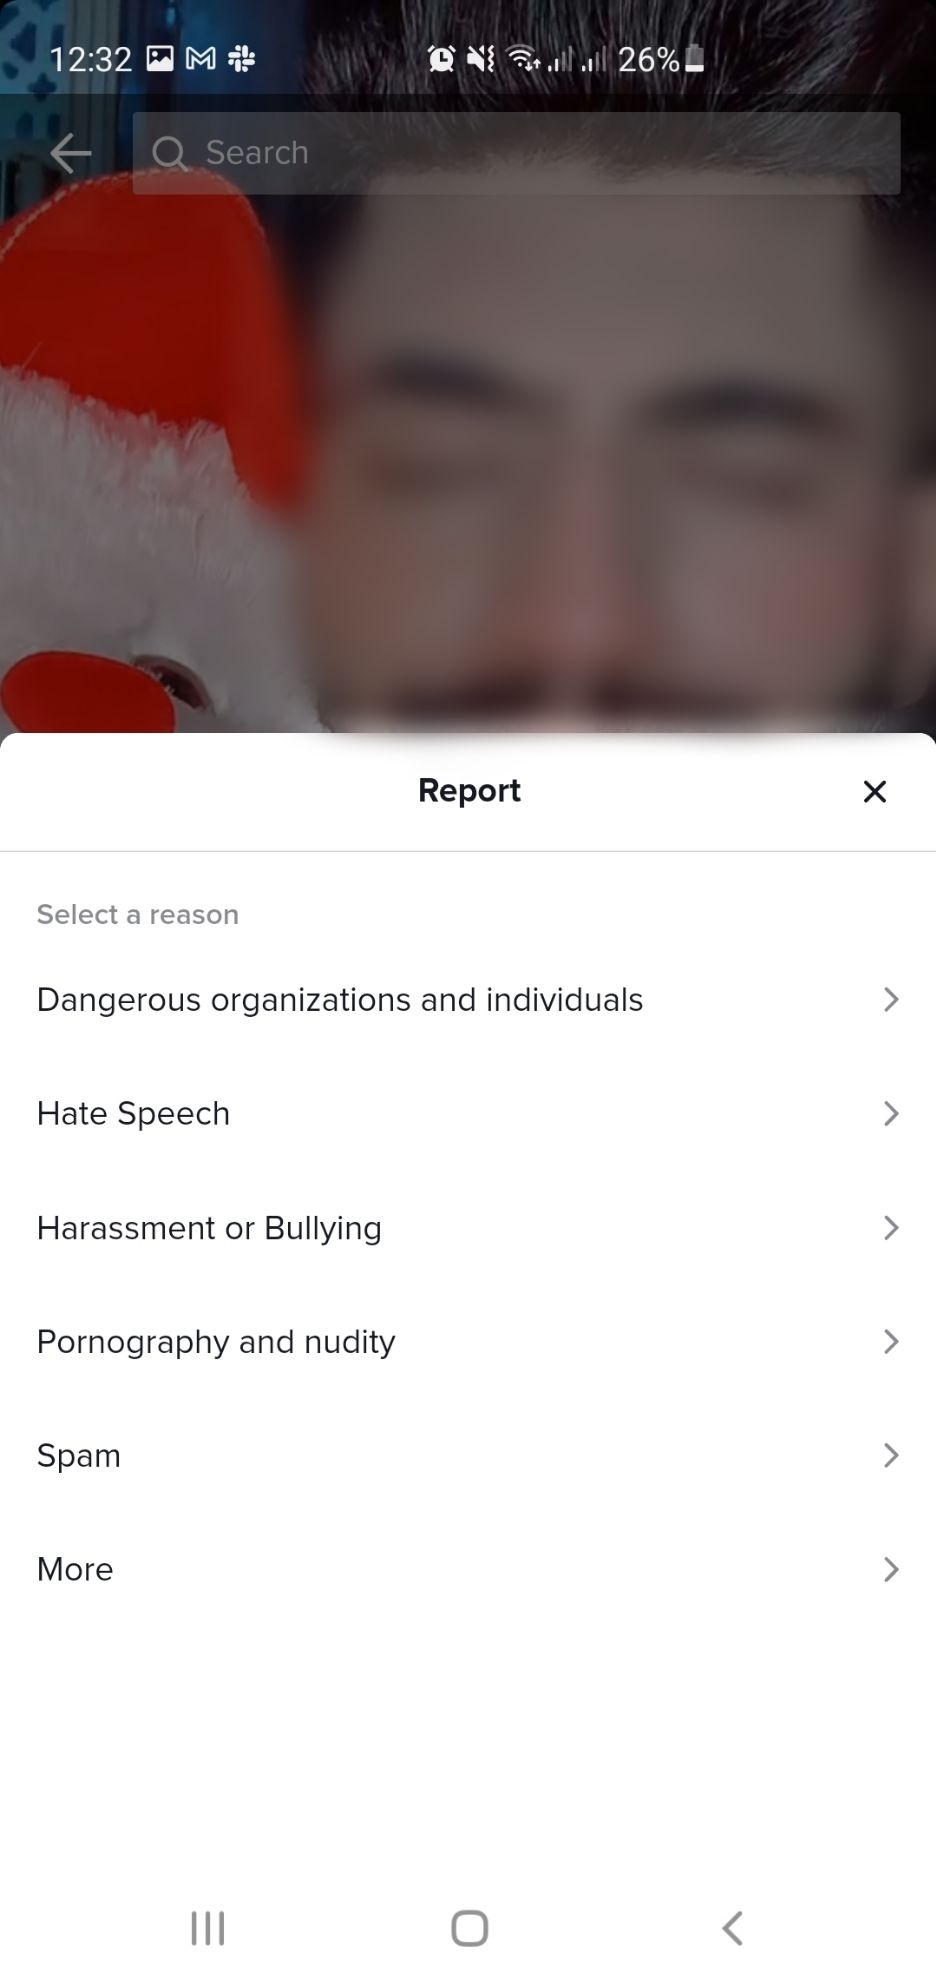 Select reason for reporting comment